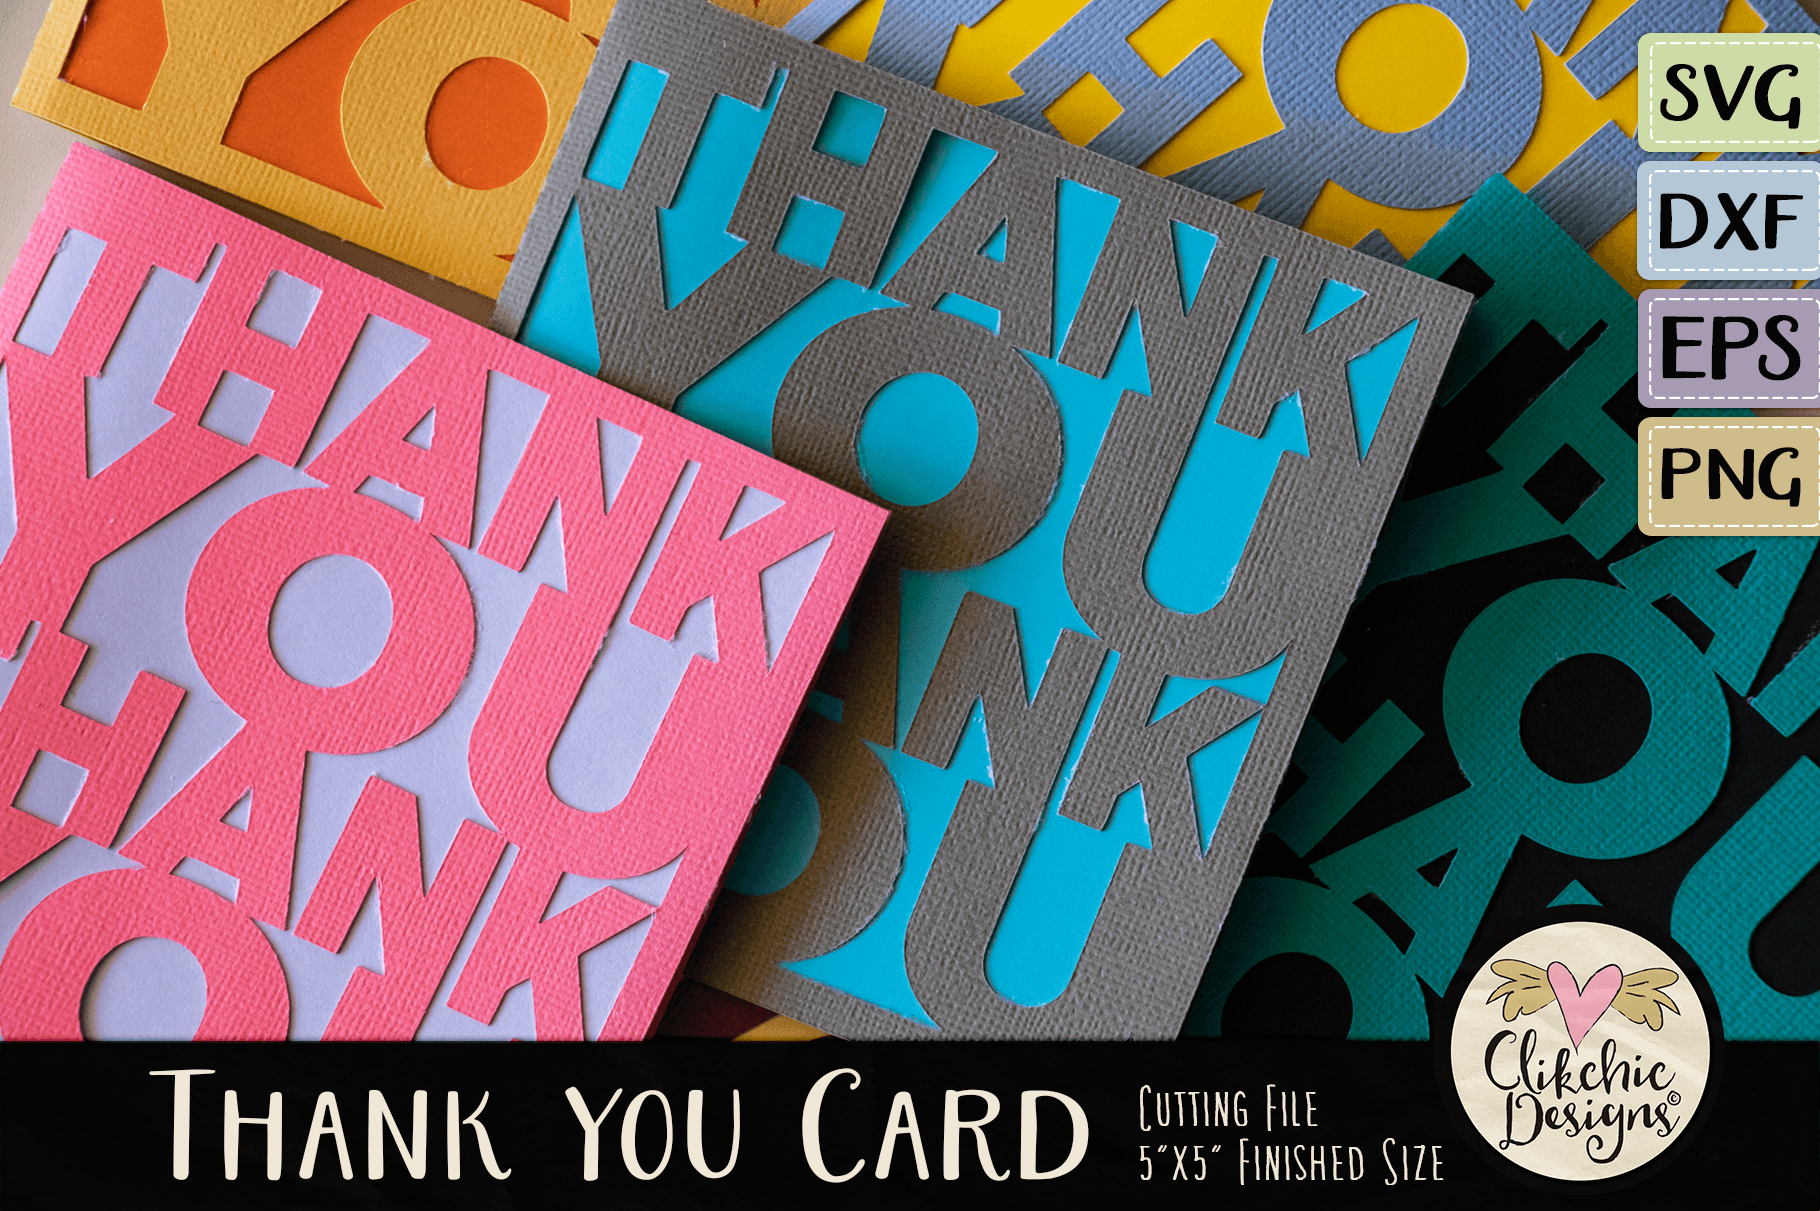 Download Thank You Card SVG - Thanks Card Cutting File, DXF, PNG, EPS